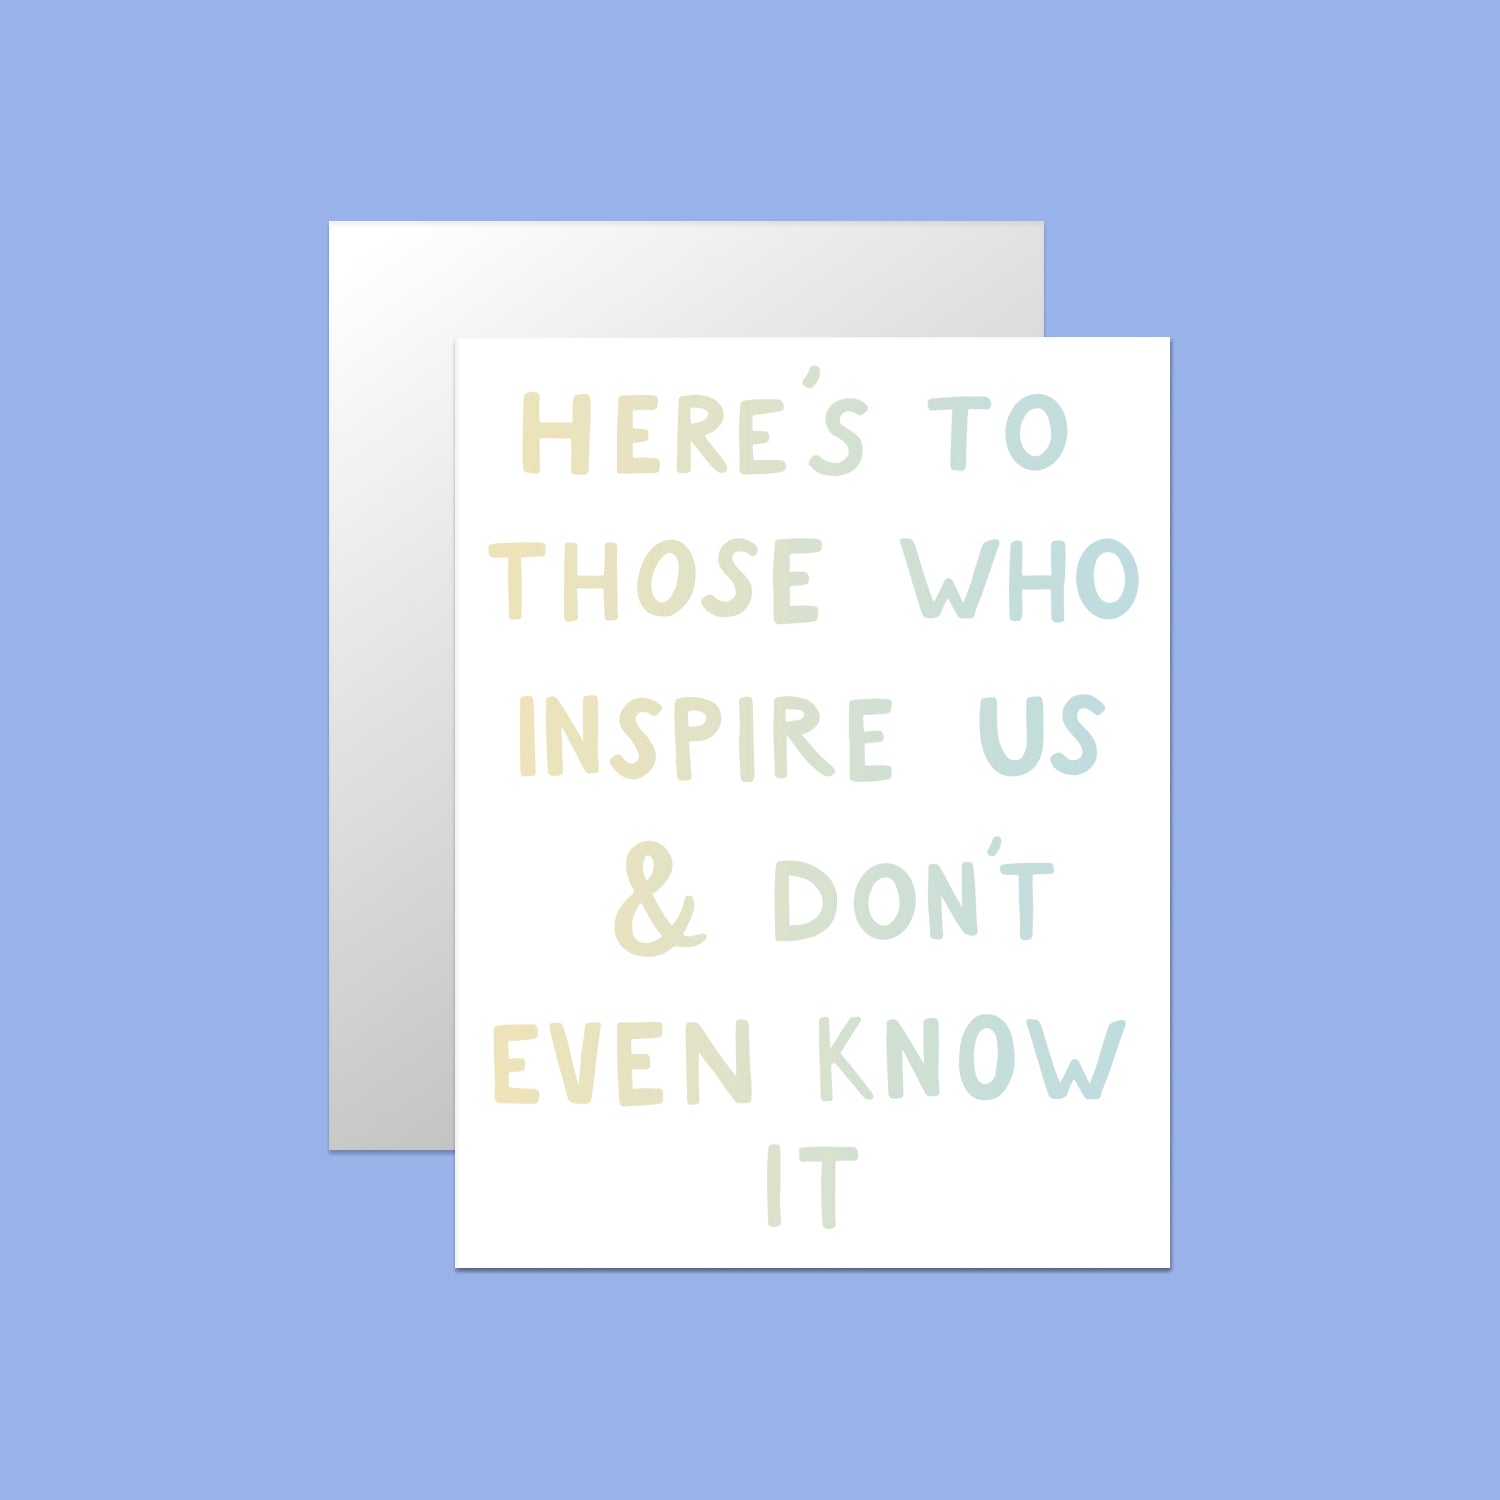 HERE'S TO THOSE WHO INSPIRE US